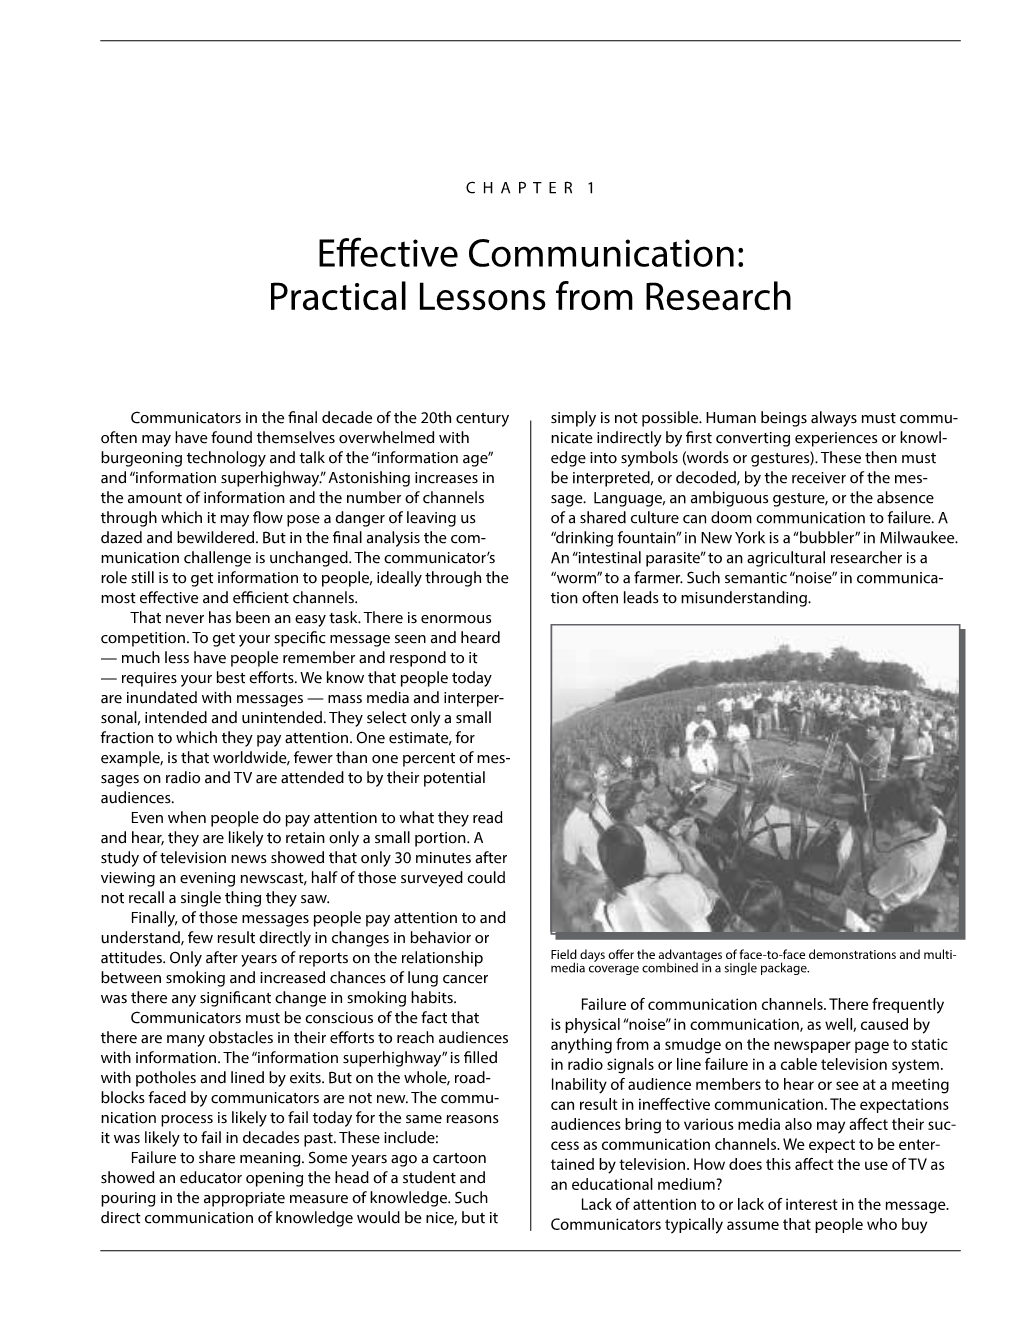 Effective Communication: Practical Lessons from Research